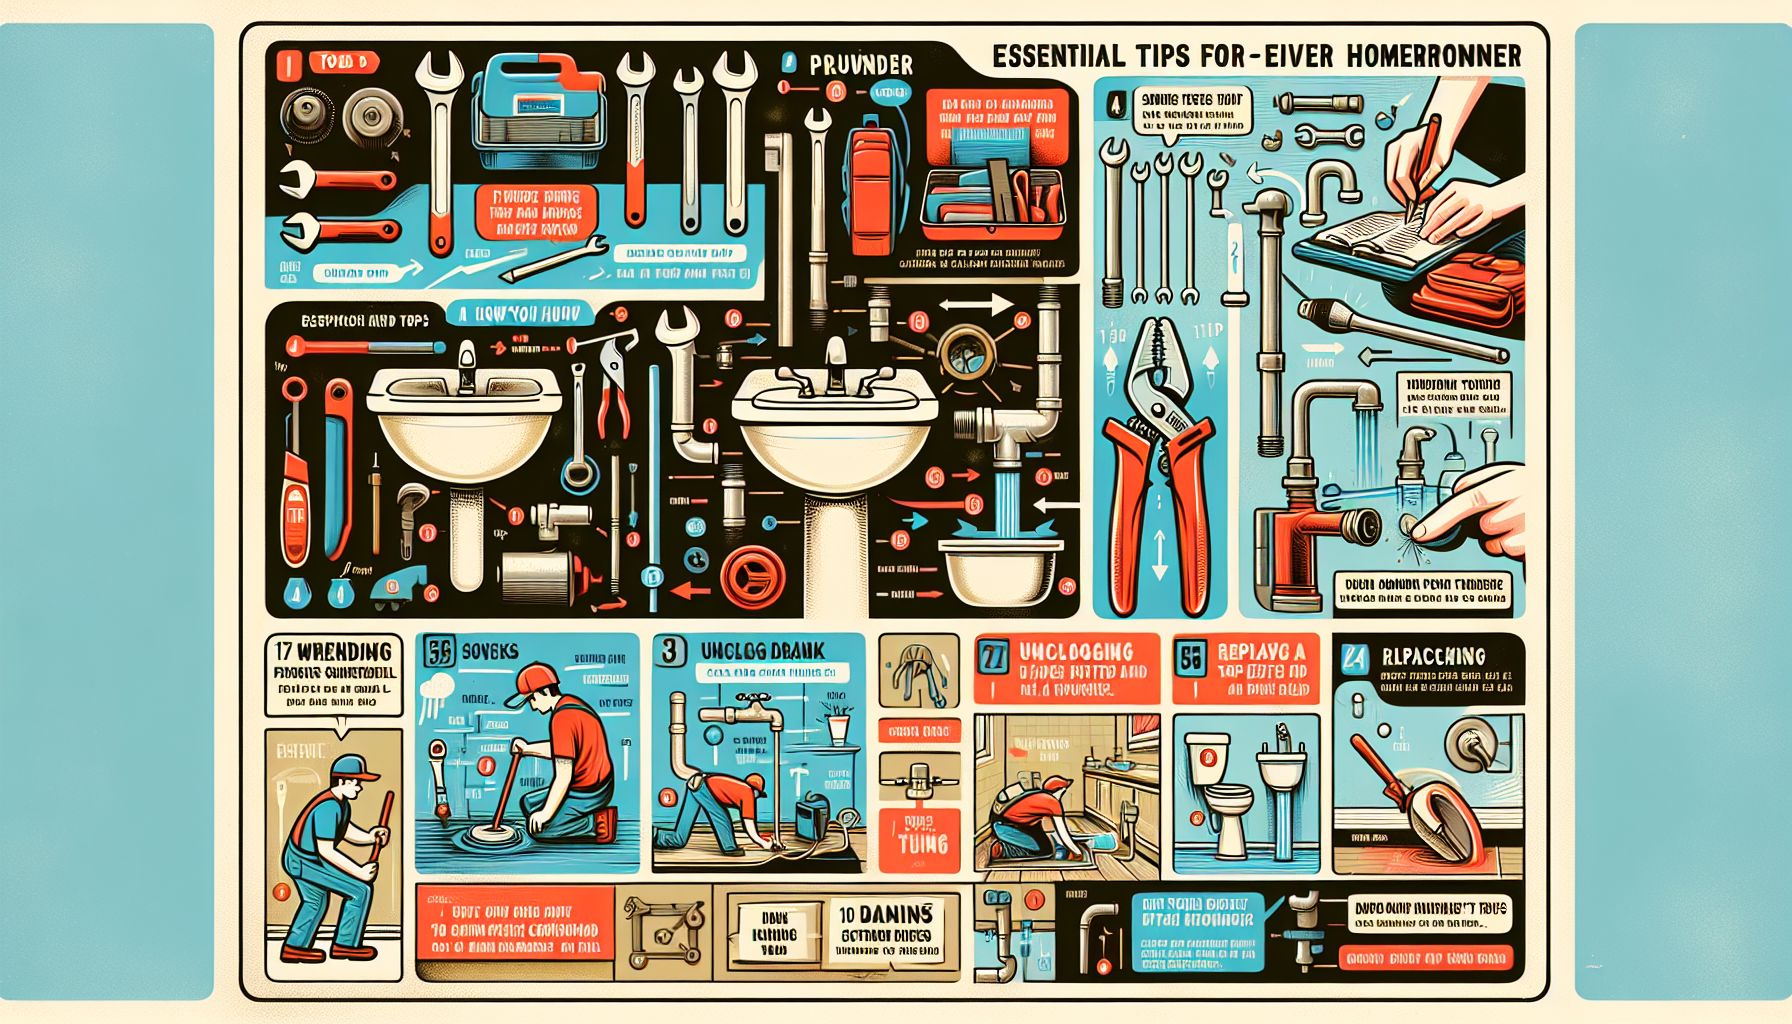 DIY Plumbing: Essential Tips for Every Homeowner